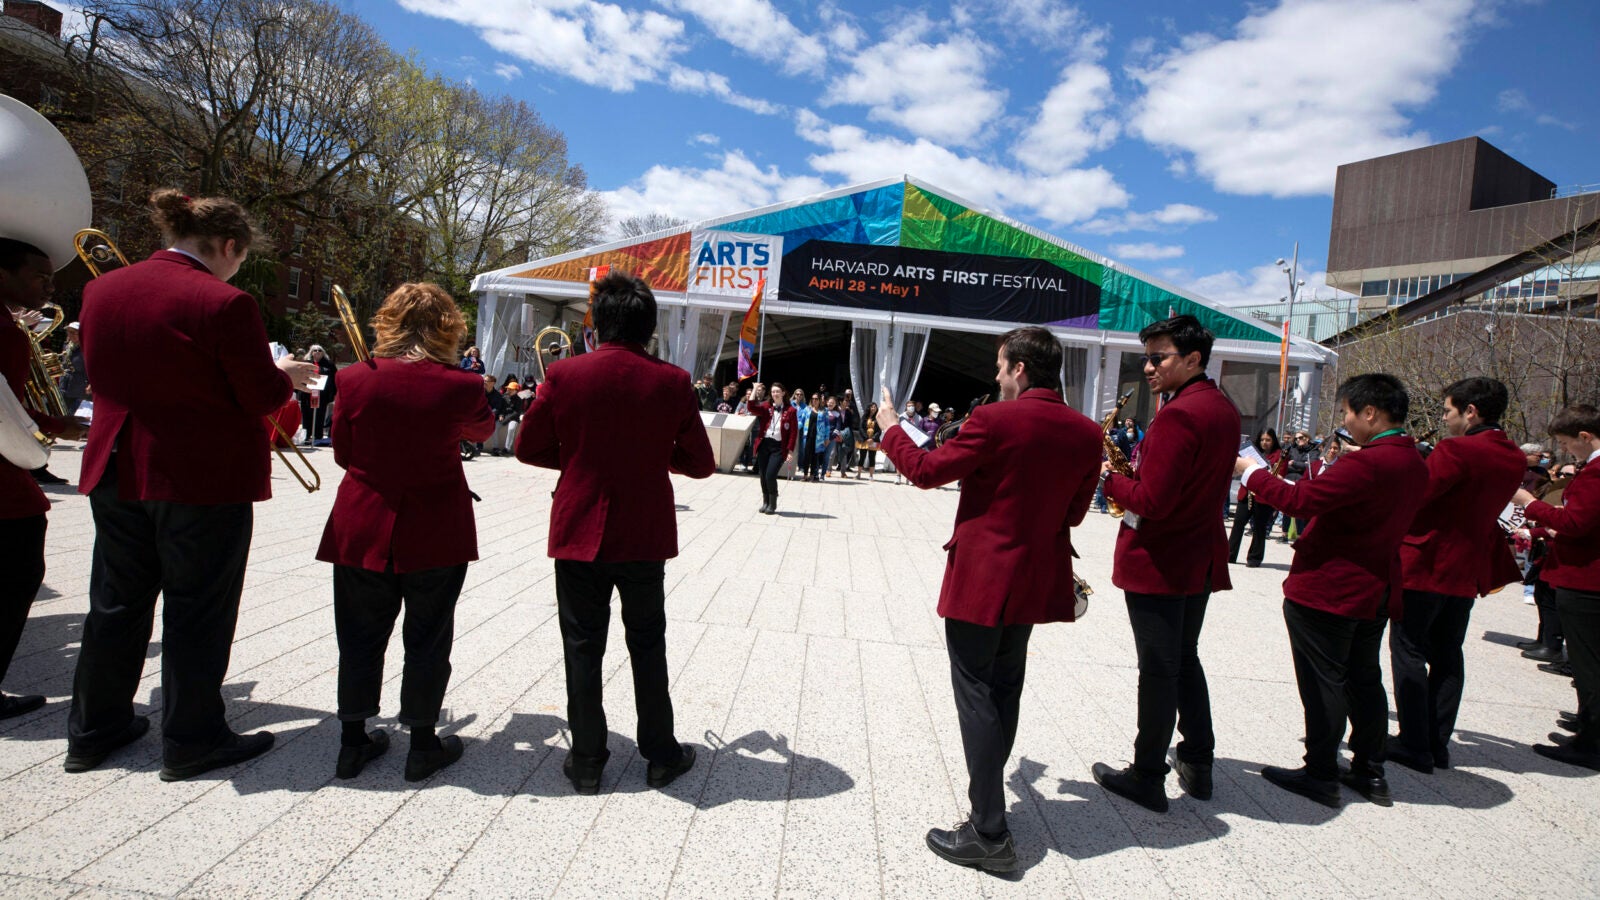 The Harvard University Band performs in the Science Center Plaza.